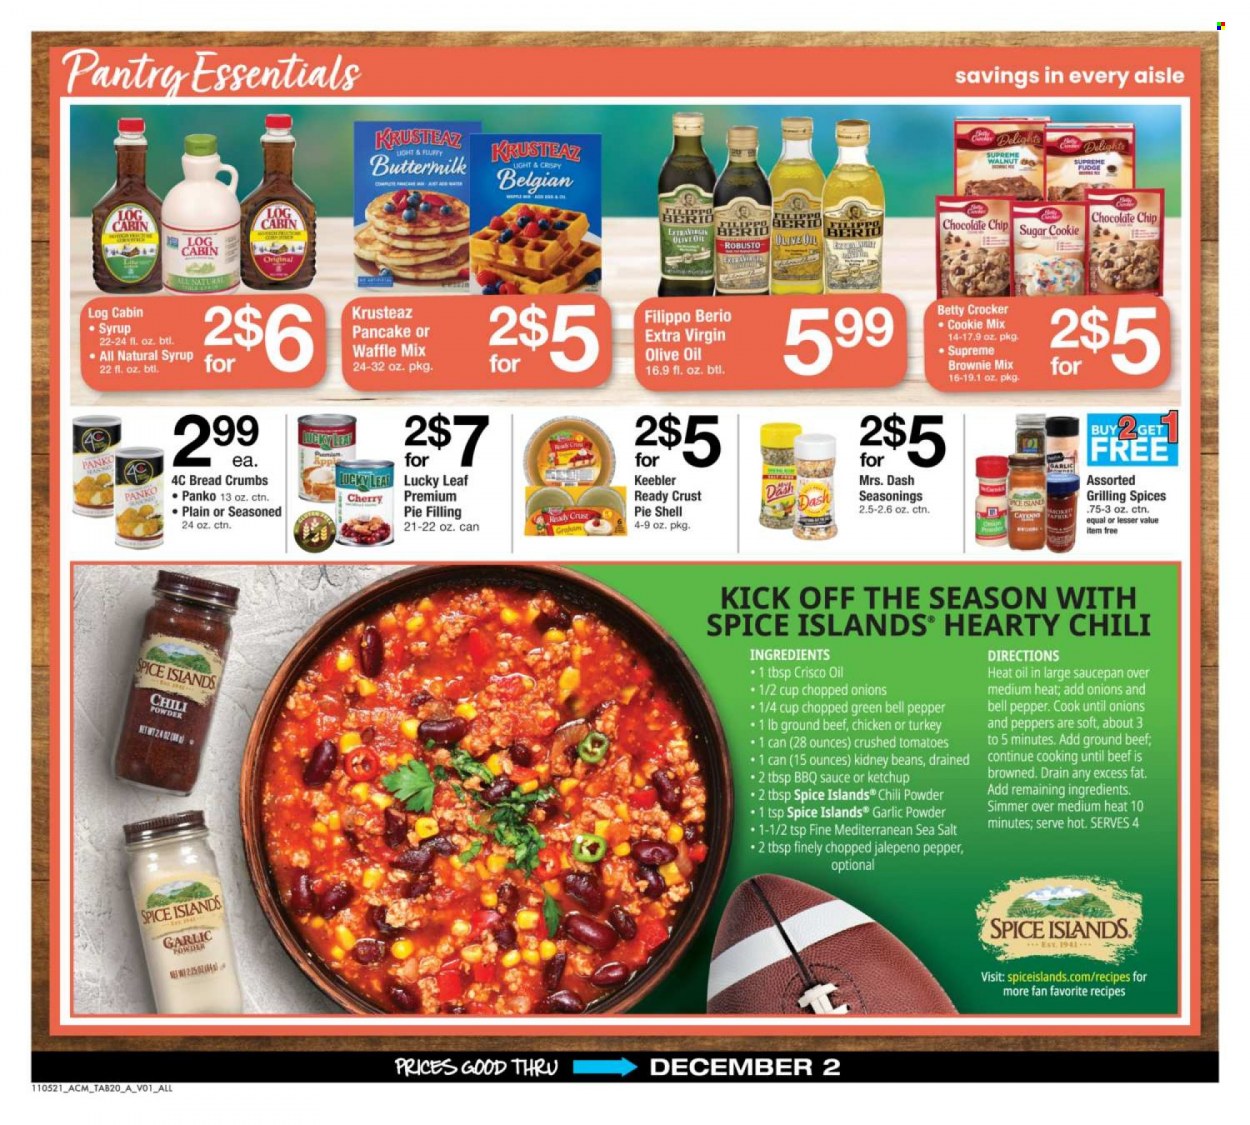 thumbnail - ACME Flyer - 11/05/2021 - 12/02/2021 - Sales products - brownie mix, panko breadcrumbs, tomatoes, onion, cherries, pancakes, buttermilk, fudge, chocolate chips, Keebler, Crisco, sugar, pie filling, sea salt, crushed tomatoes, kidney beans, pepper, spice, garlic powder, BBQ sauce, ketchup, extra virgin olive oil, olive oil, syrup, beef meat, ground beef, saucepan. Page 20.